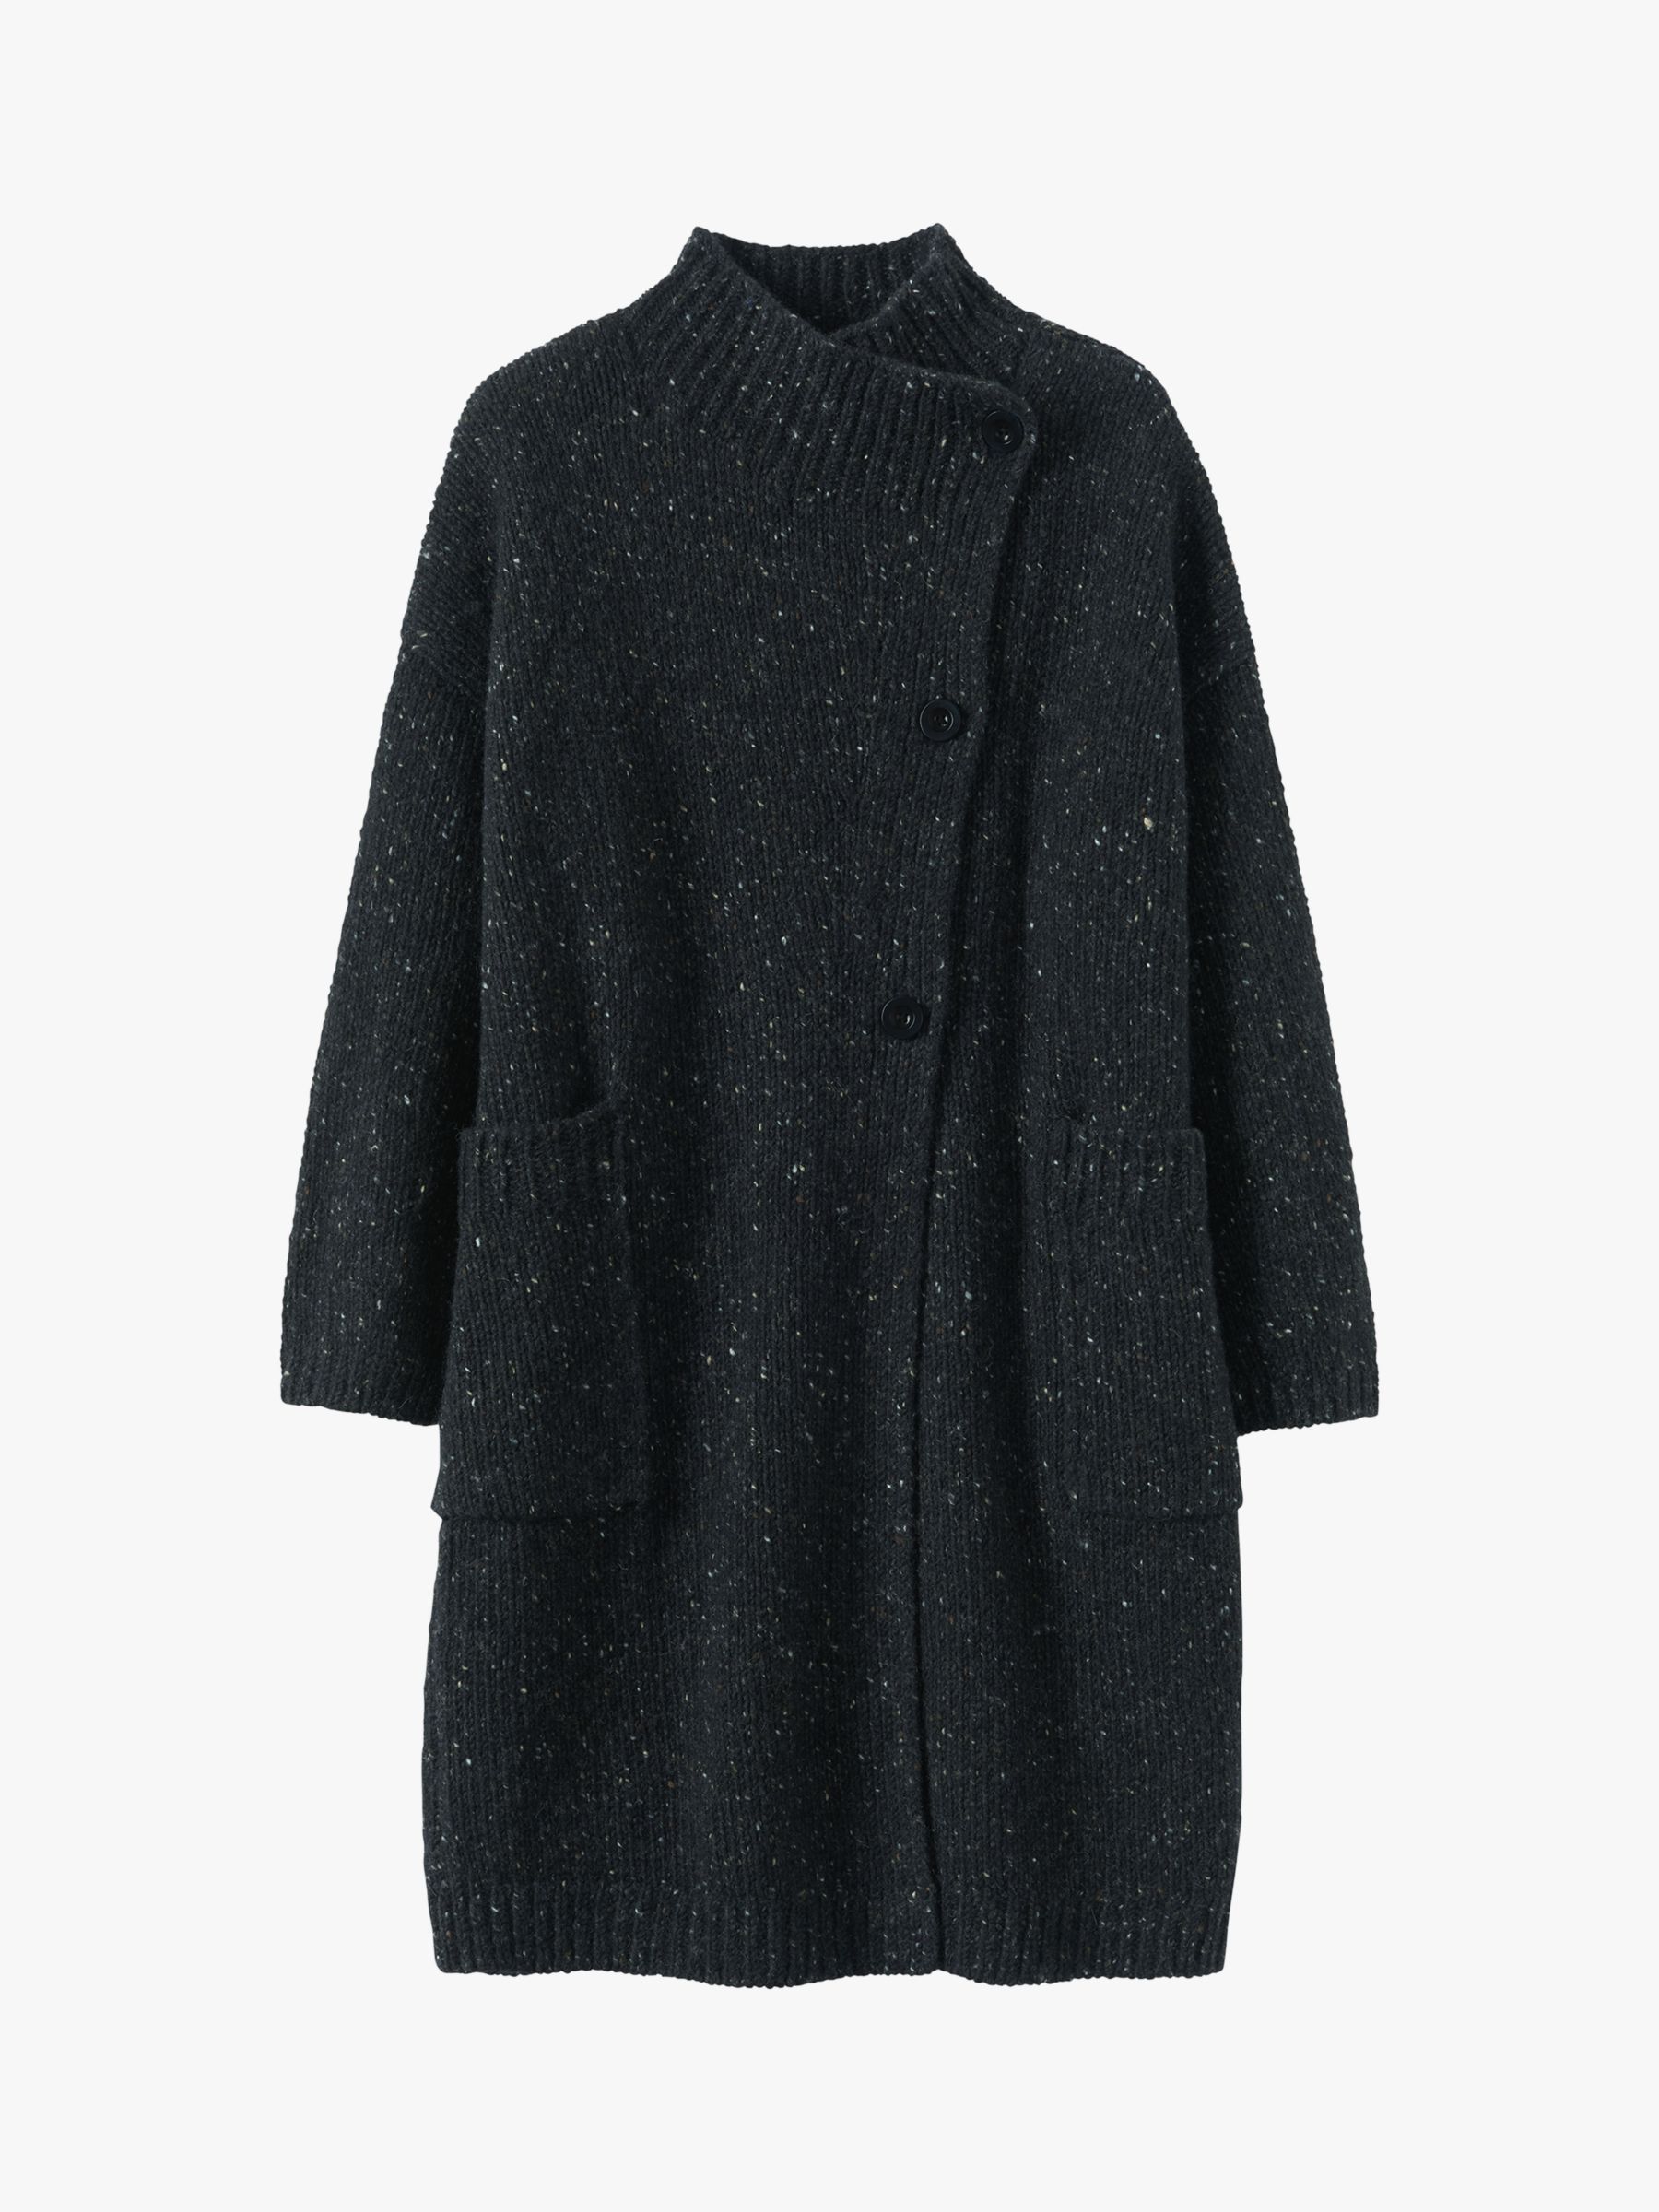 Toast Knitted Tweed Coat, Charcoal